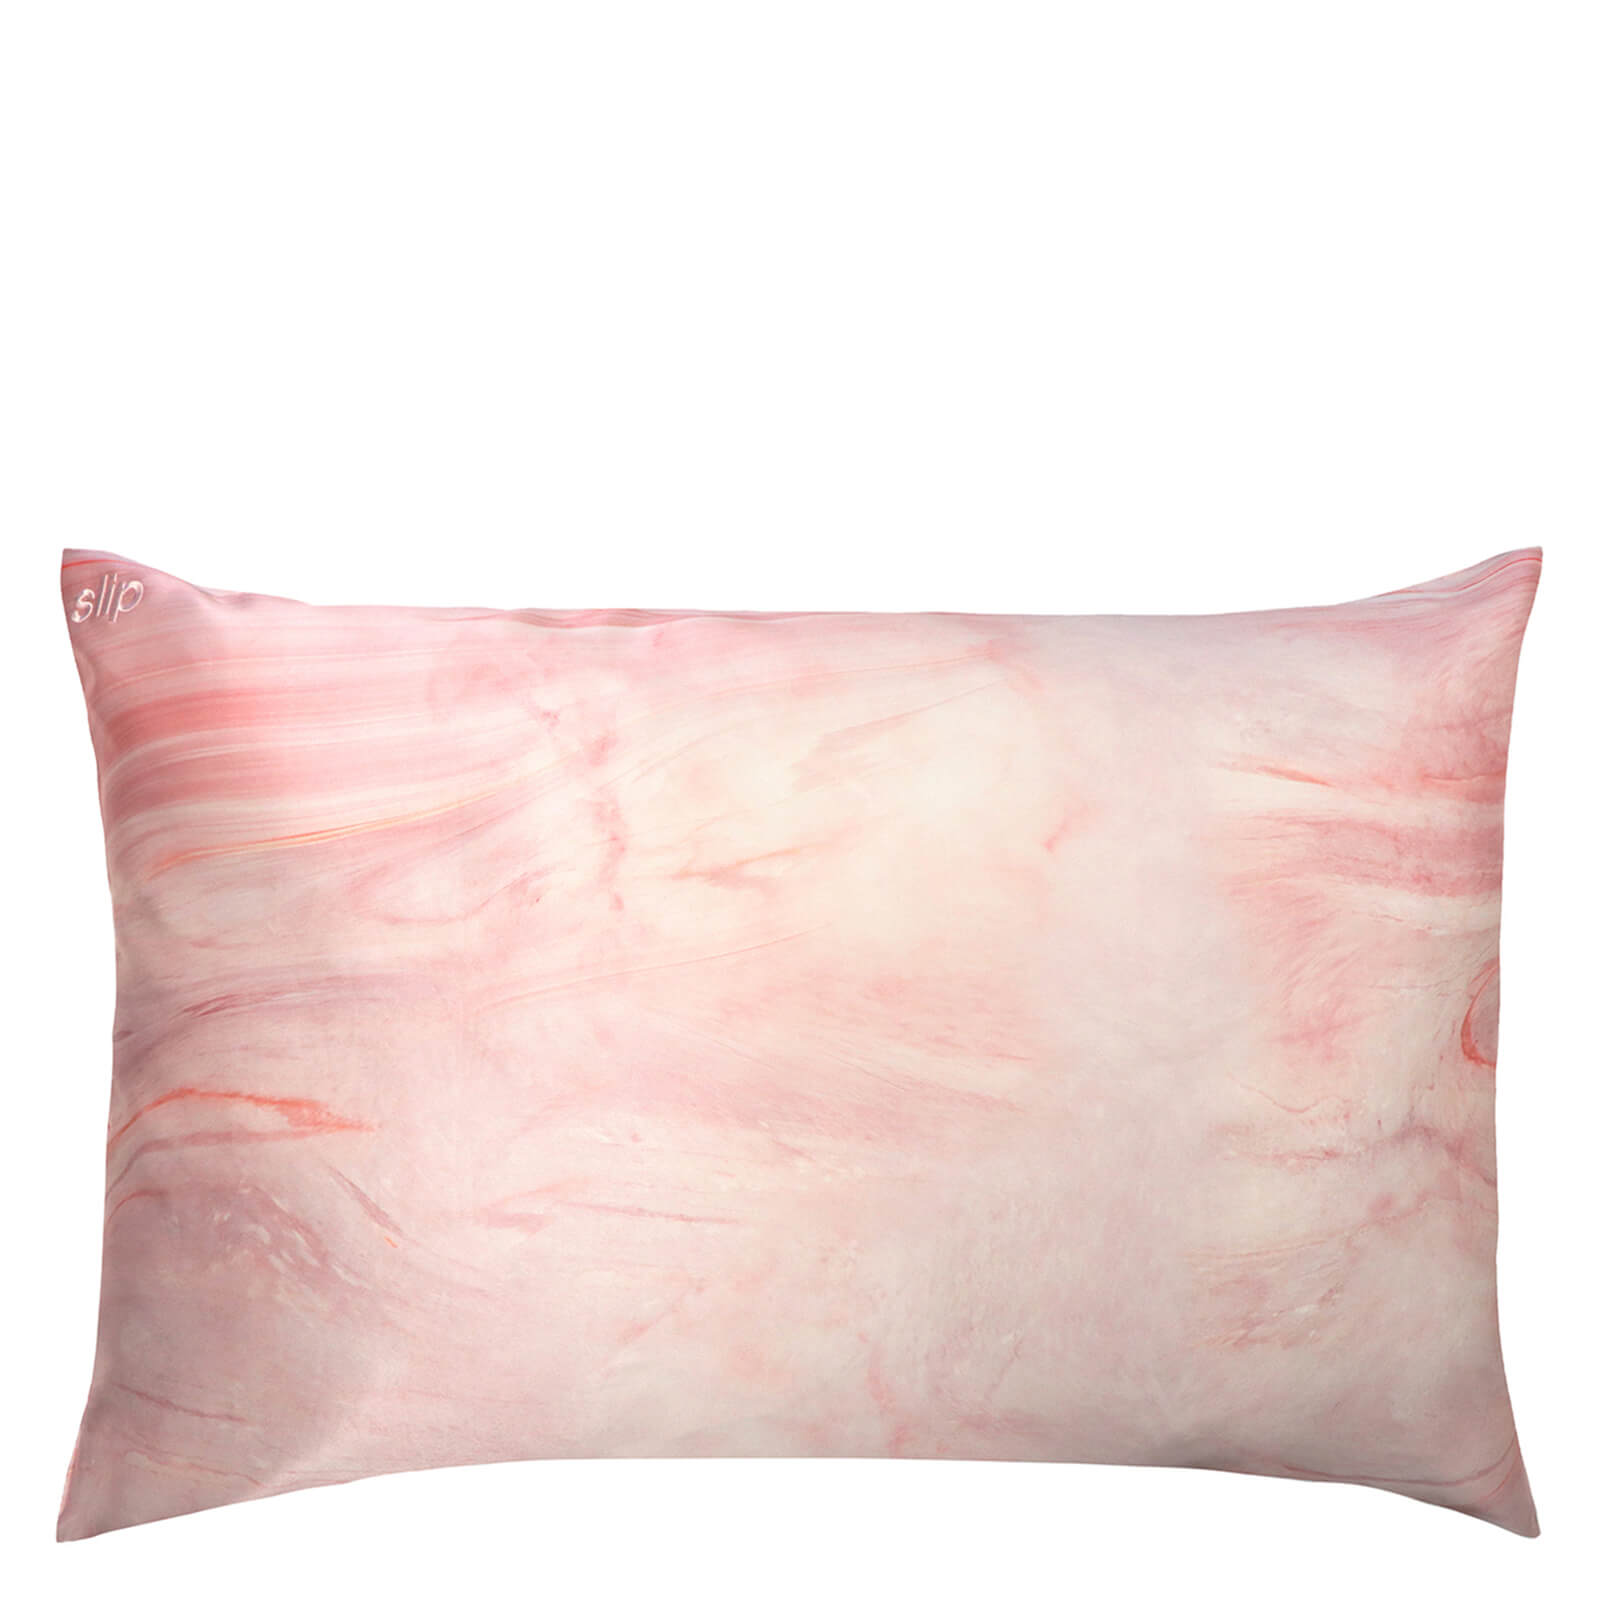 Slip Pure Silk Pillowcase - Pink Agate (Exclusive To LOOKFANTASTIC)